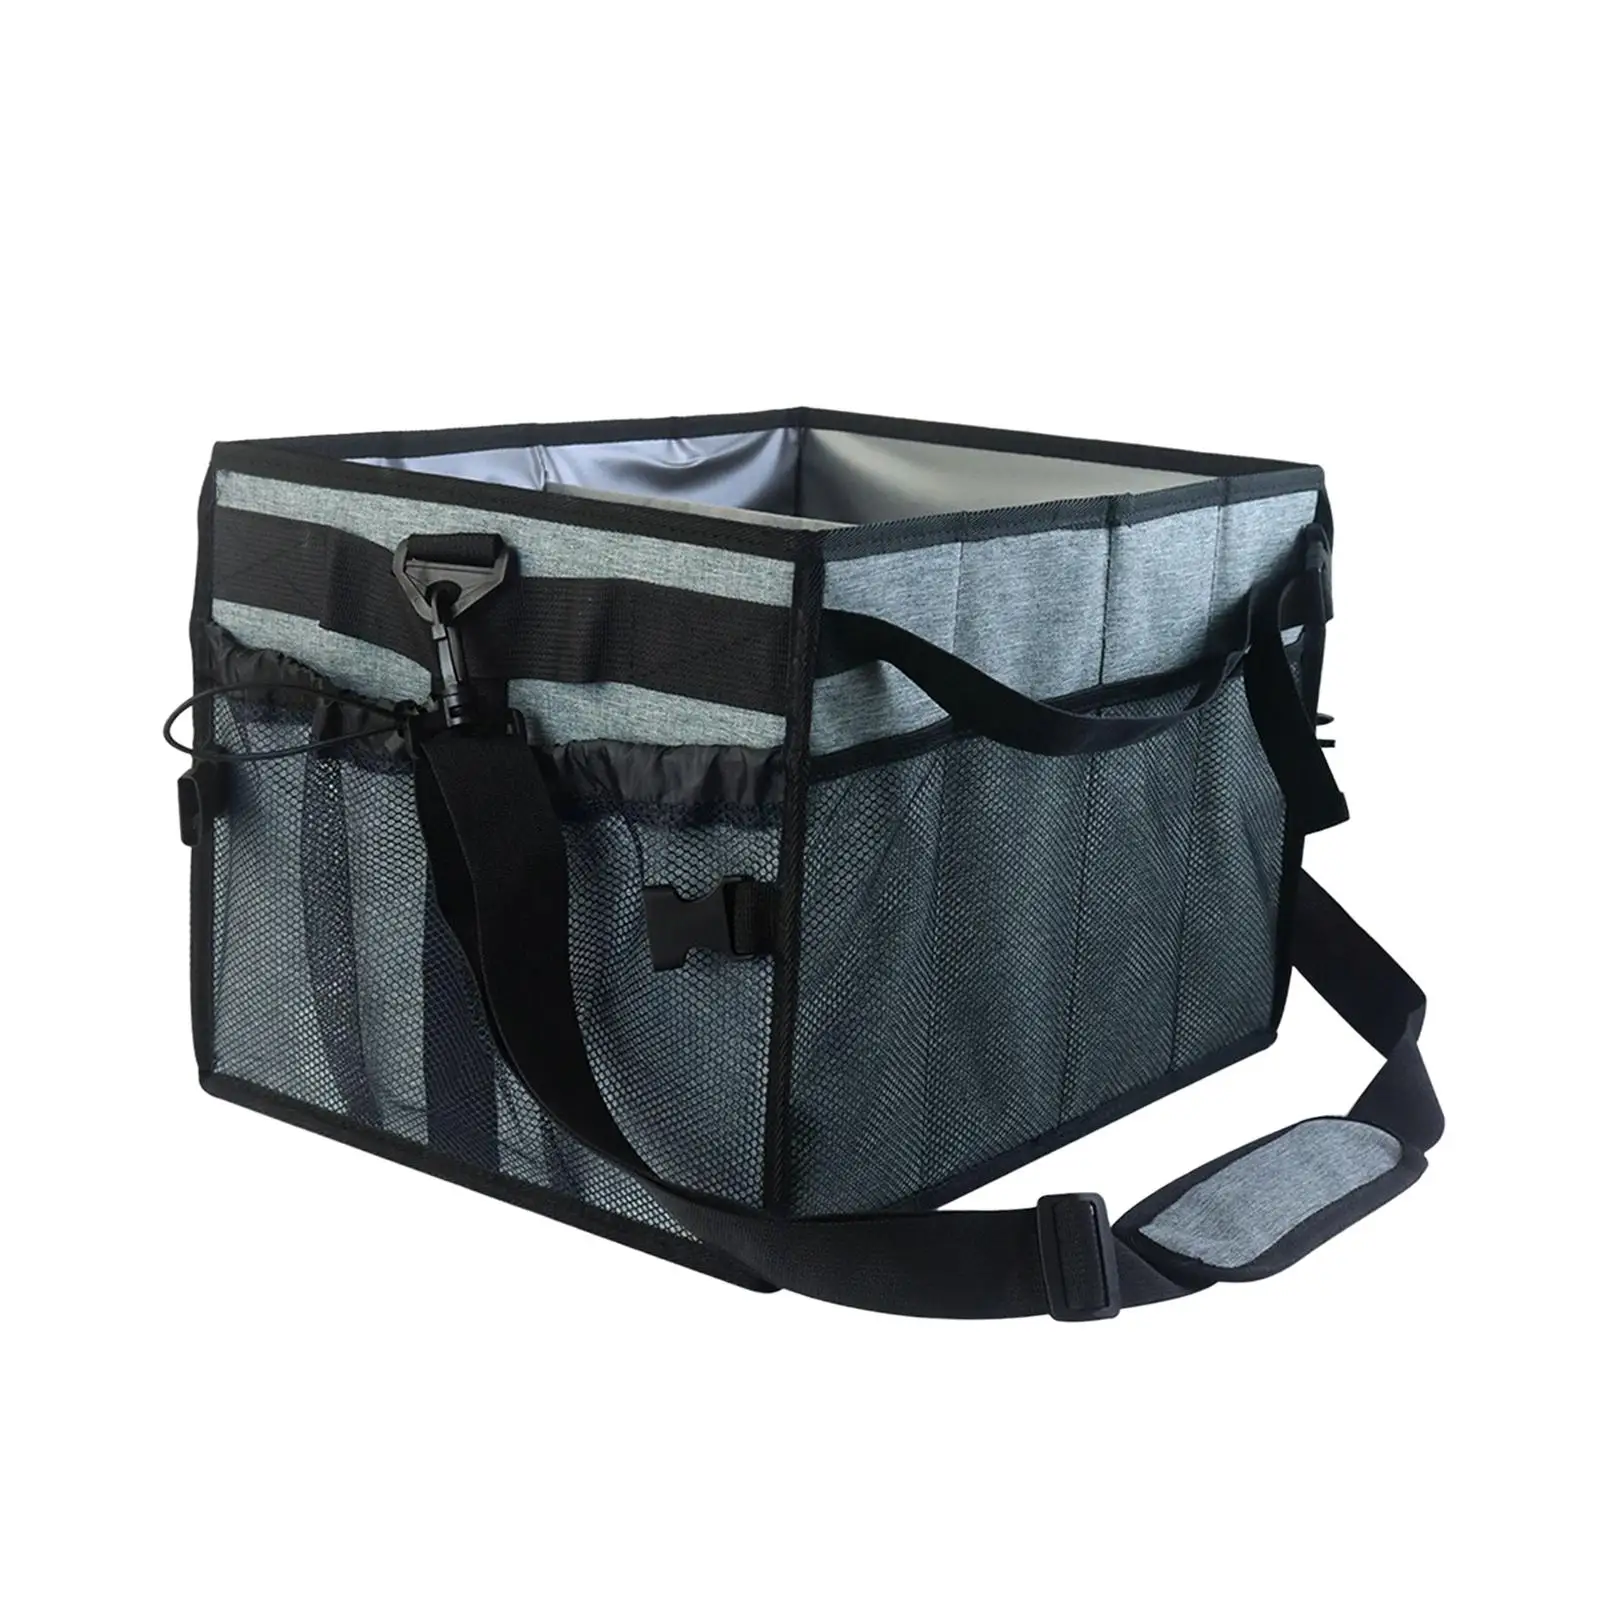 Outdoor Camping Storage Bag Waterproof with Handle Seasoning Bottle Holder Grill Tool Carrying Bag for Outdoor Backpacking Trip